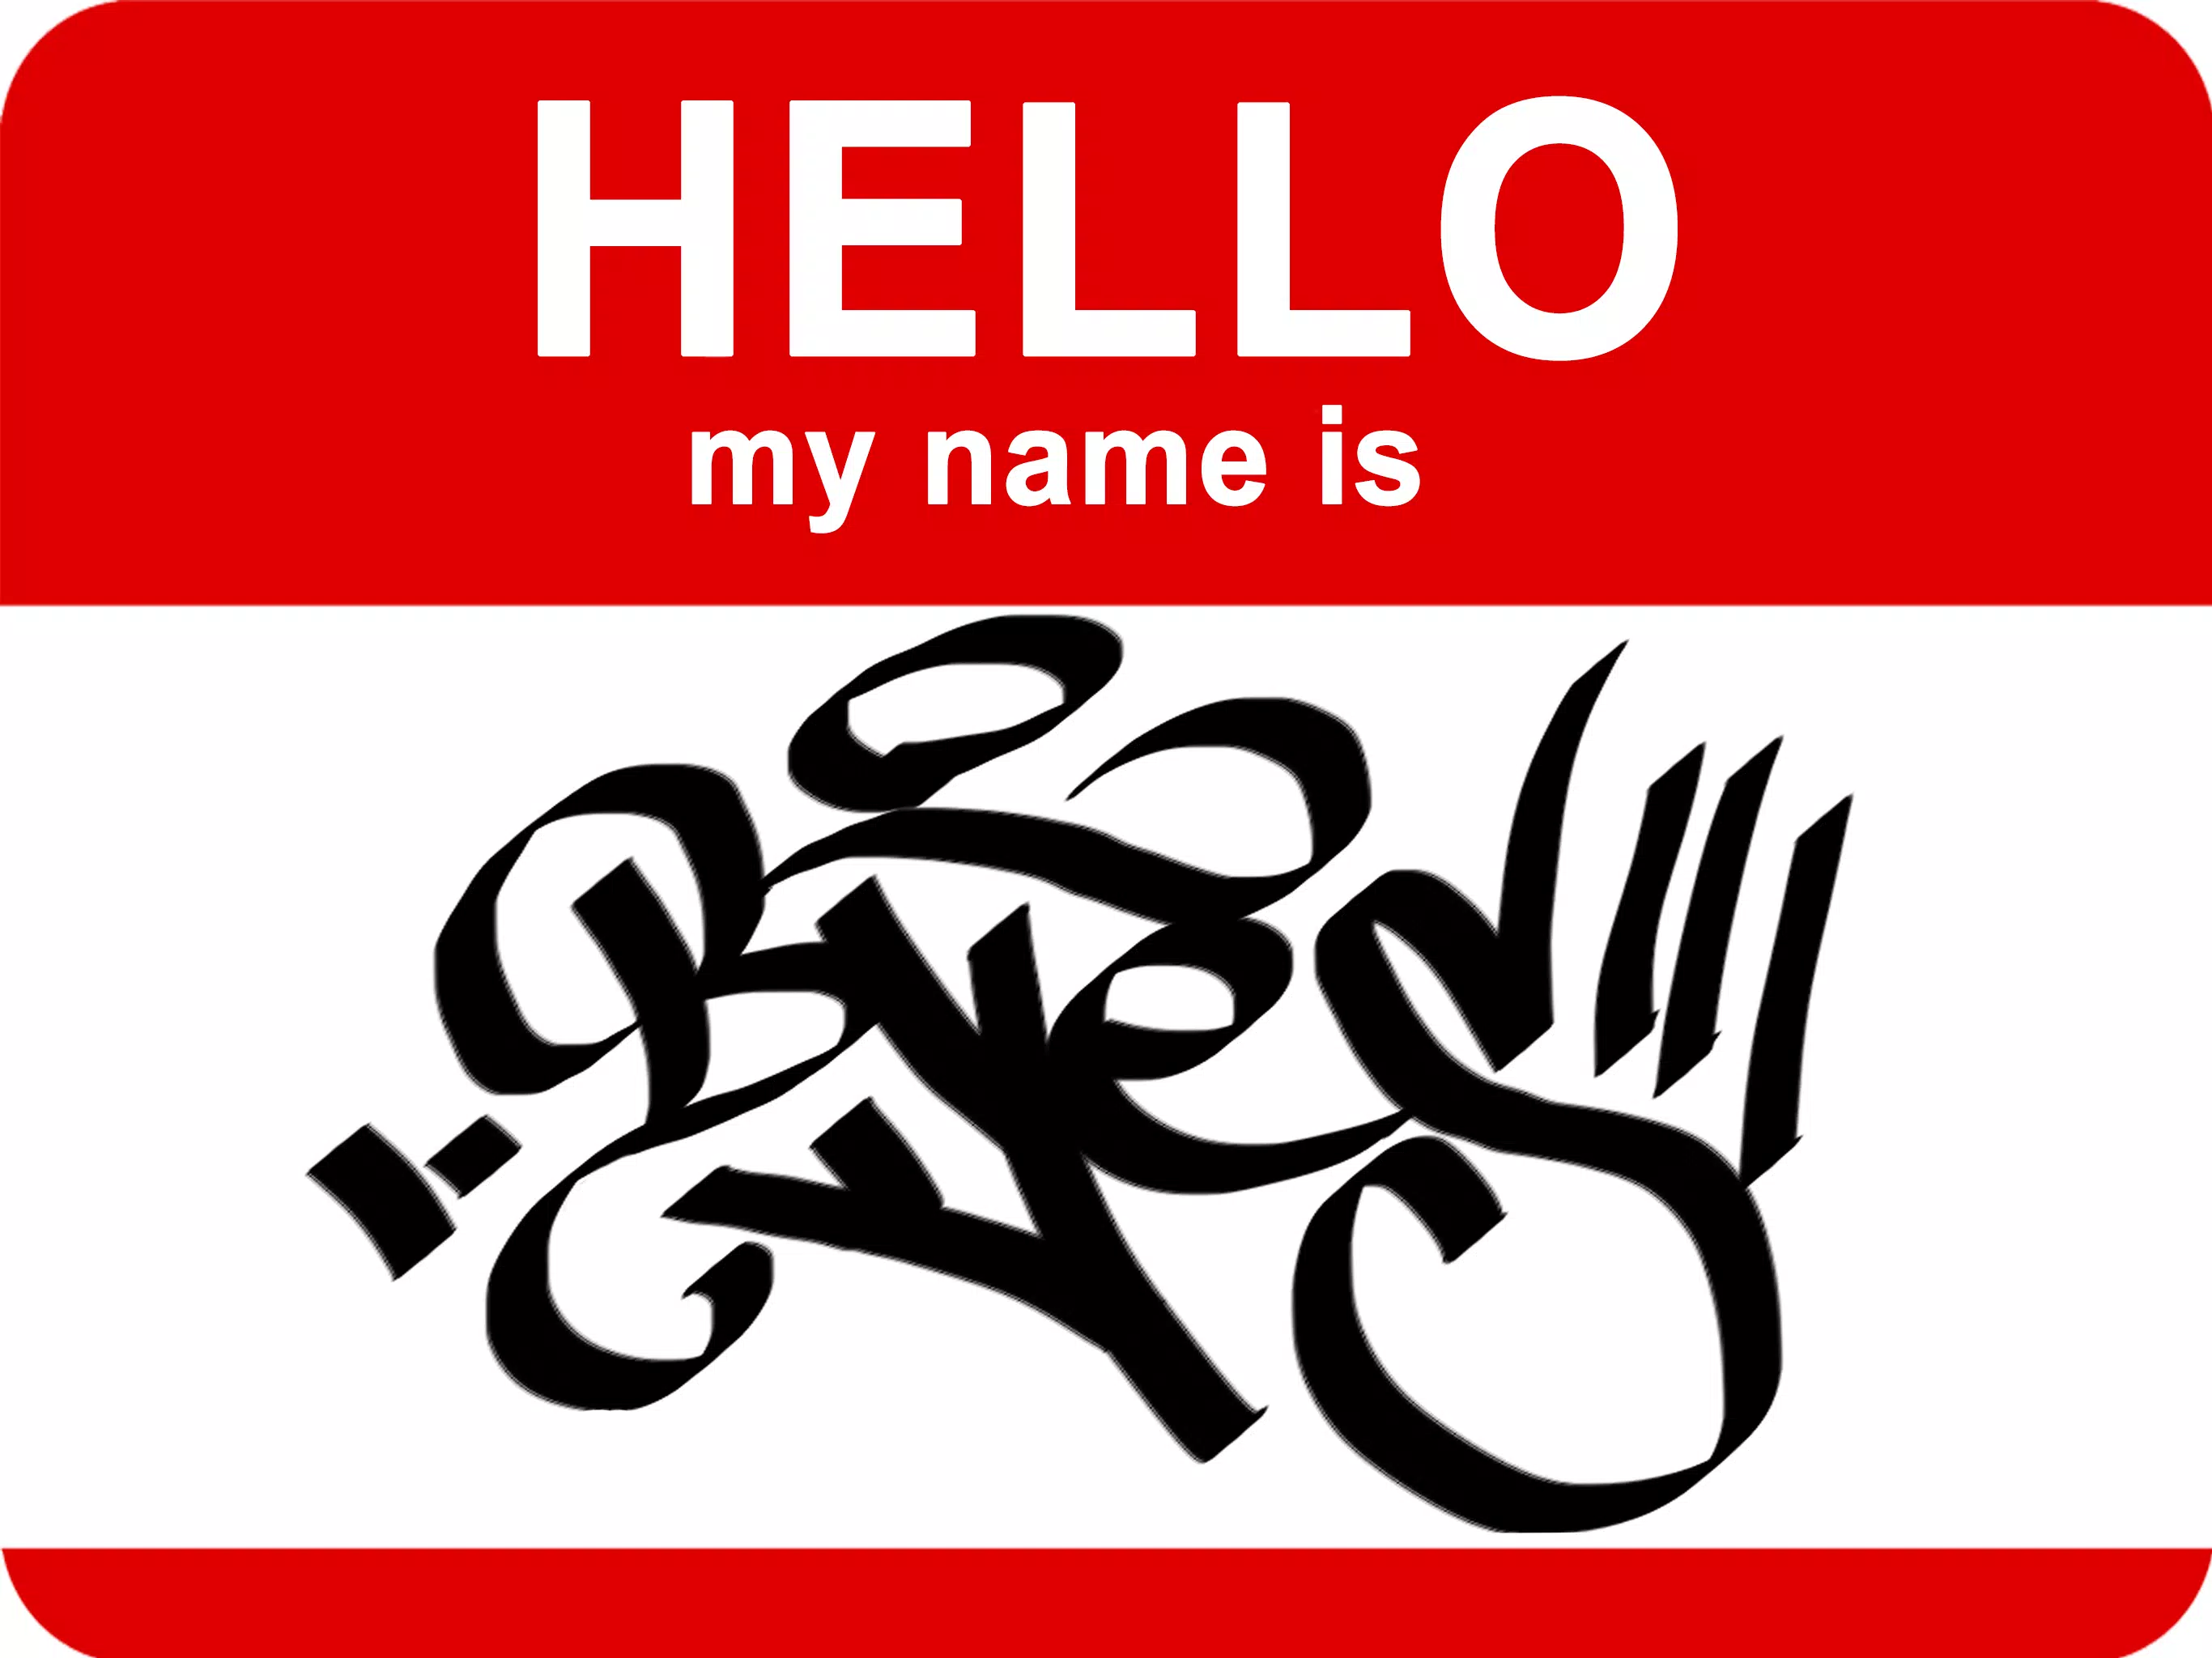 This name is in use. Стикеры hello my name is. Стикеры hello my name. Стикеры для граффити hello my name is. Стикеры для тегов hello my name is.